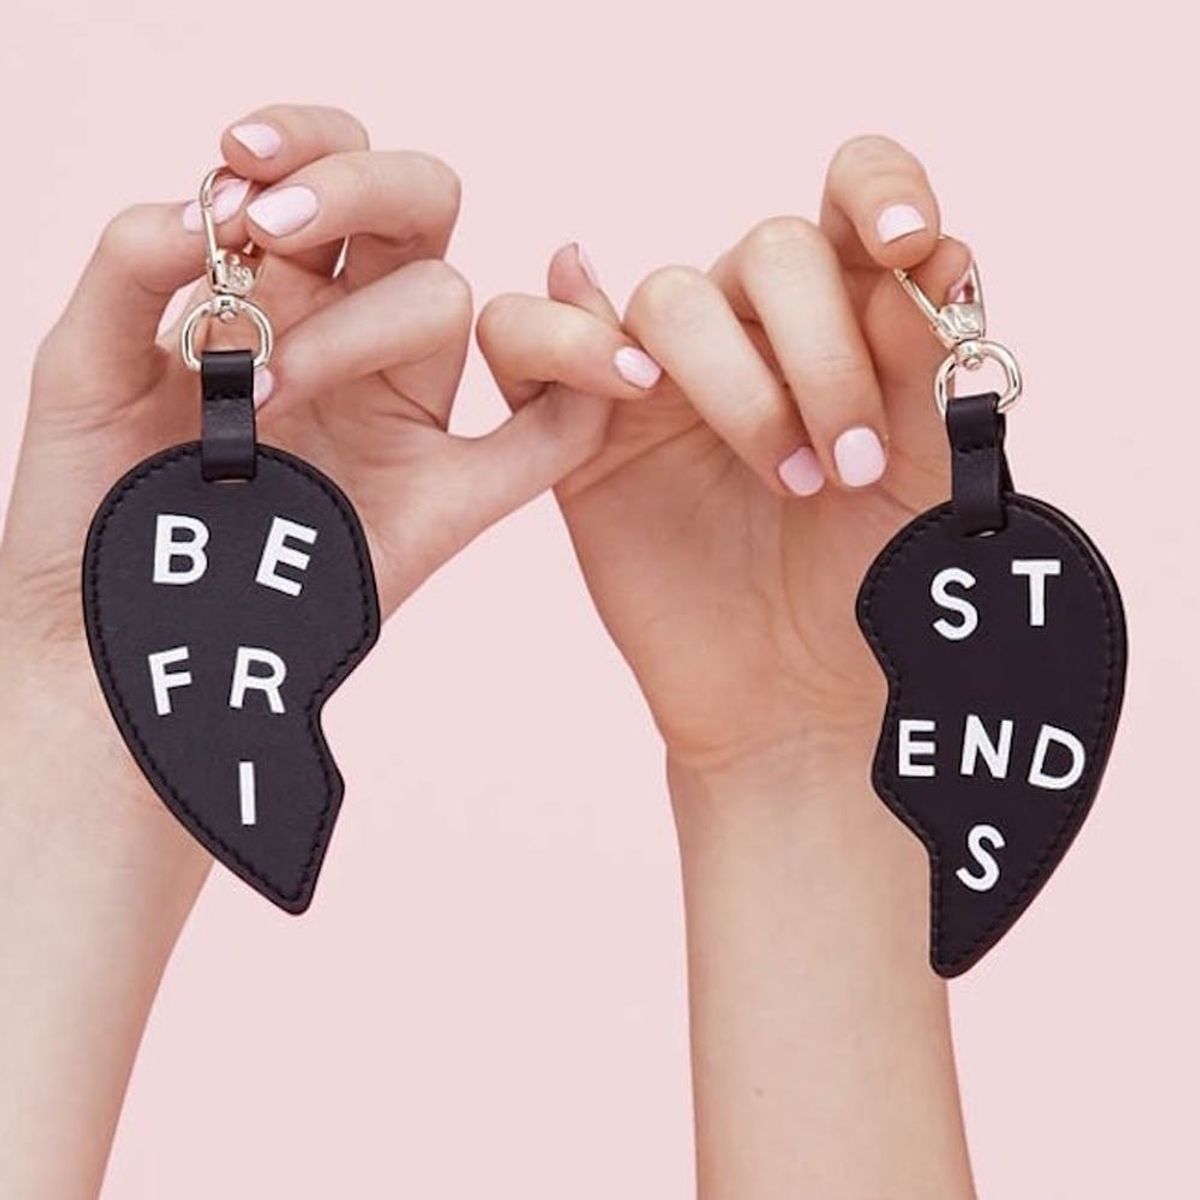 12 Squad Accessories for You and Your #Girlgang